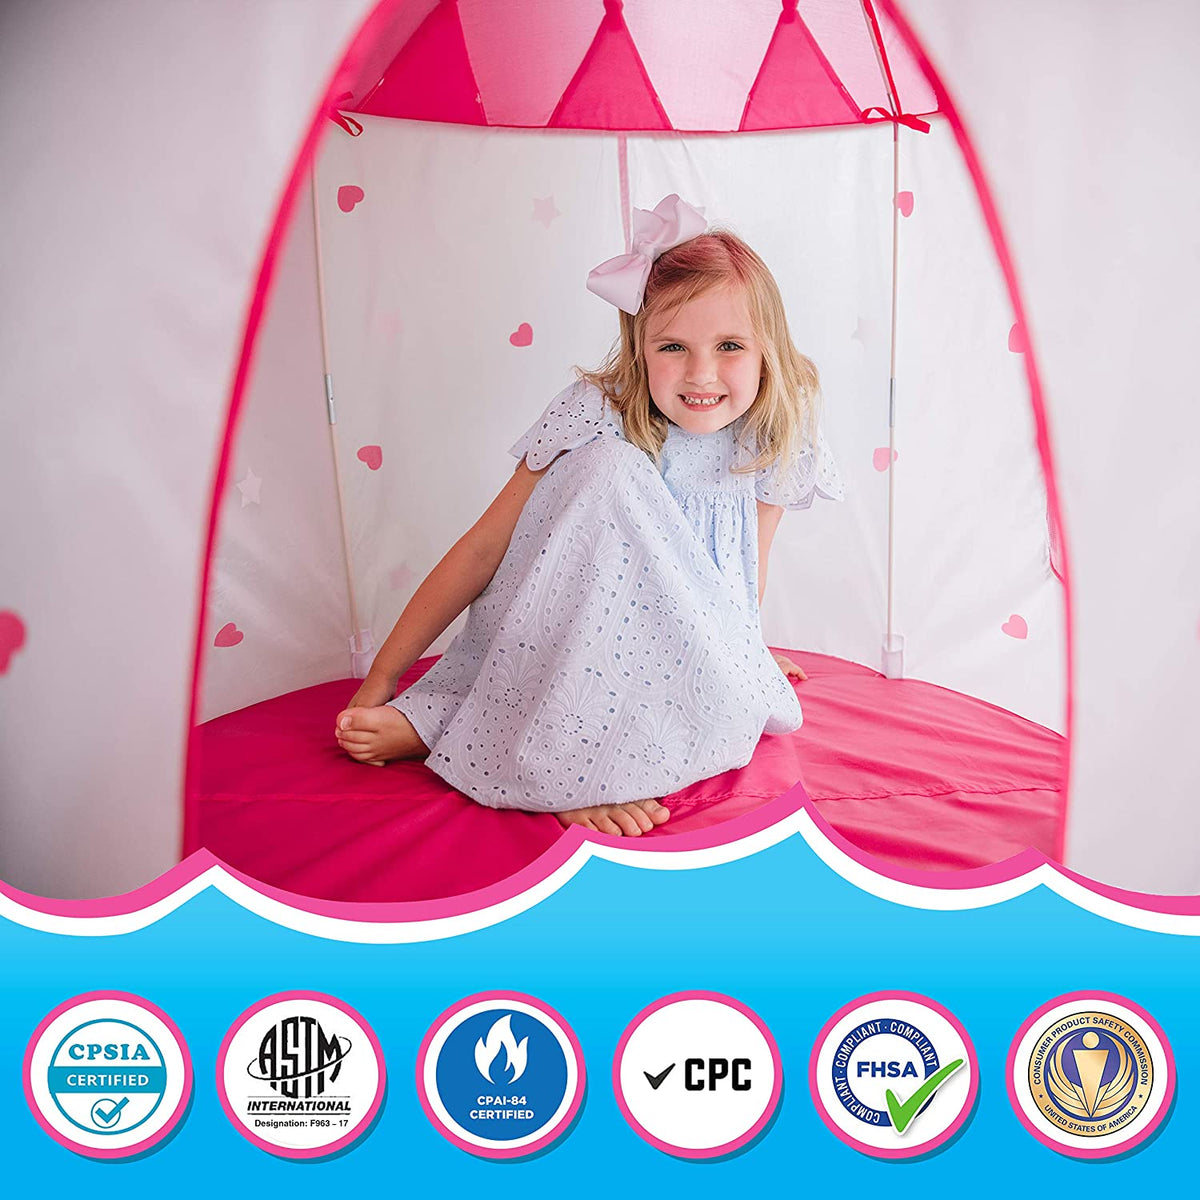 Princess Castle Play Tent With Glow In The Dark Stars Foldable with Carry Case